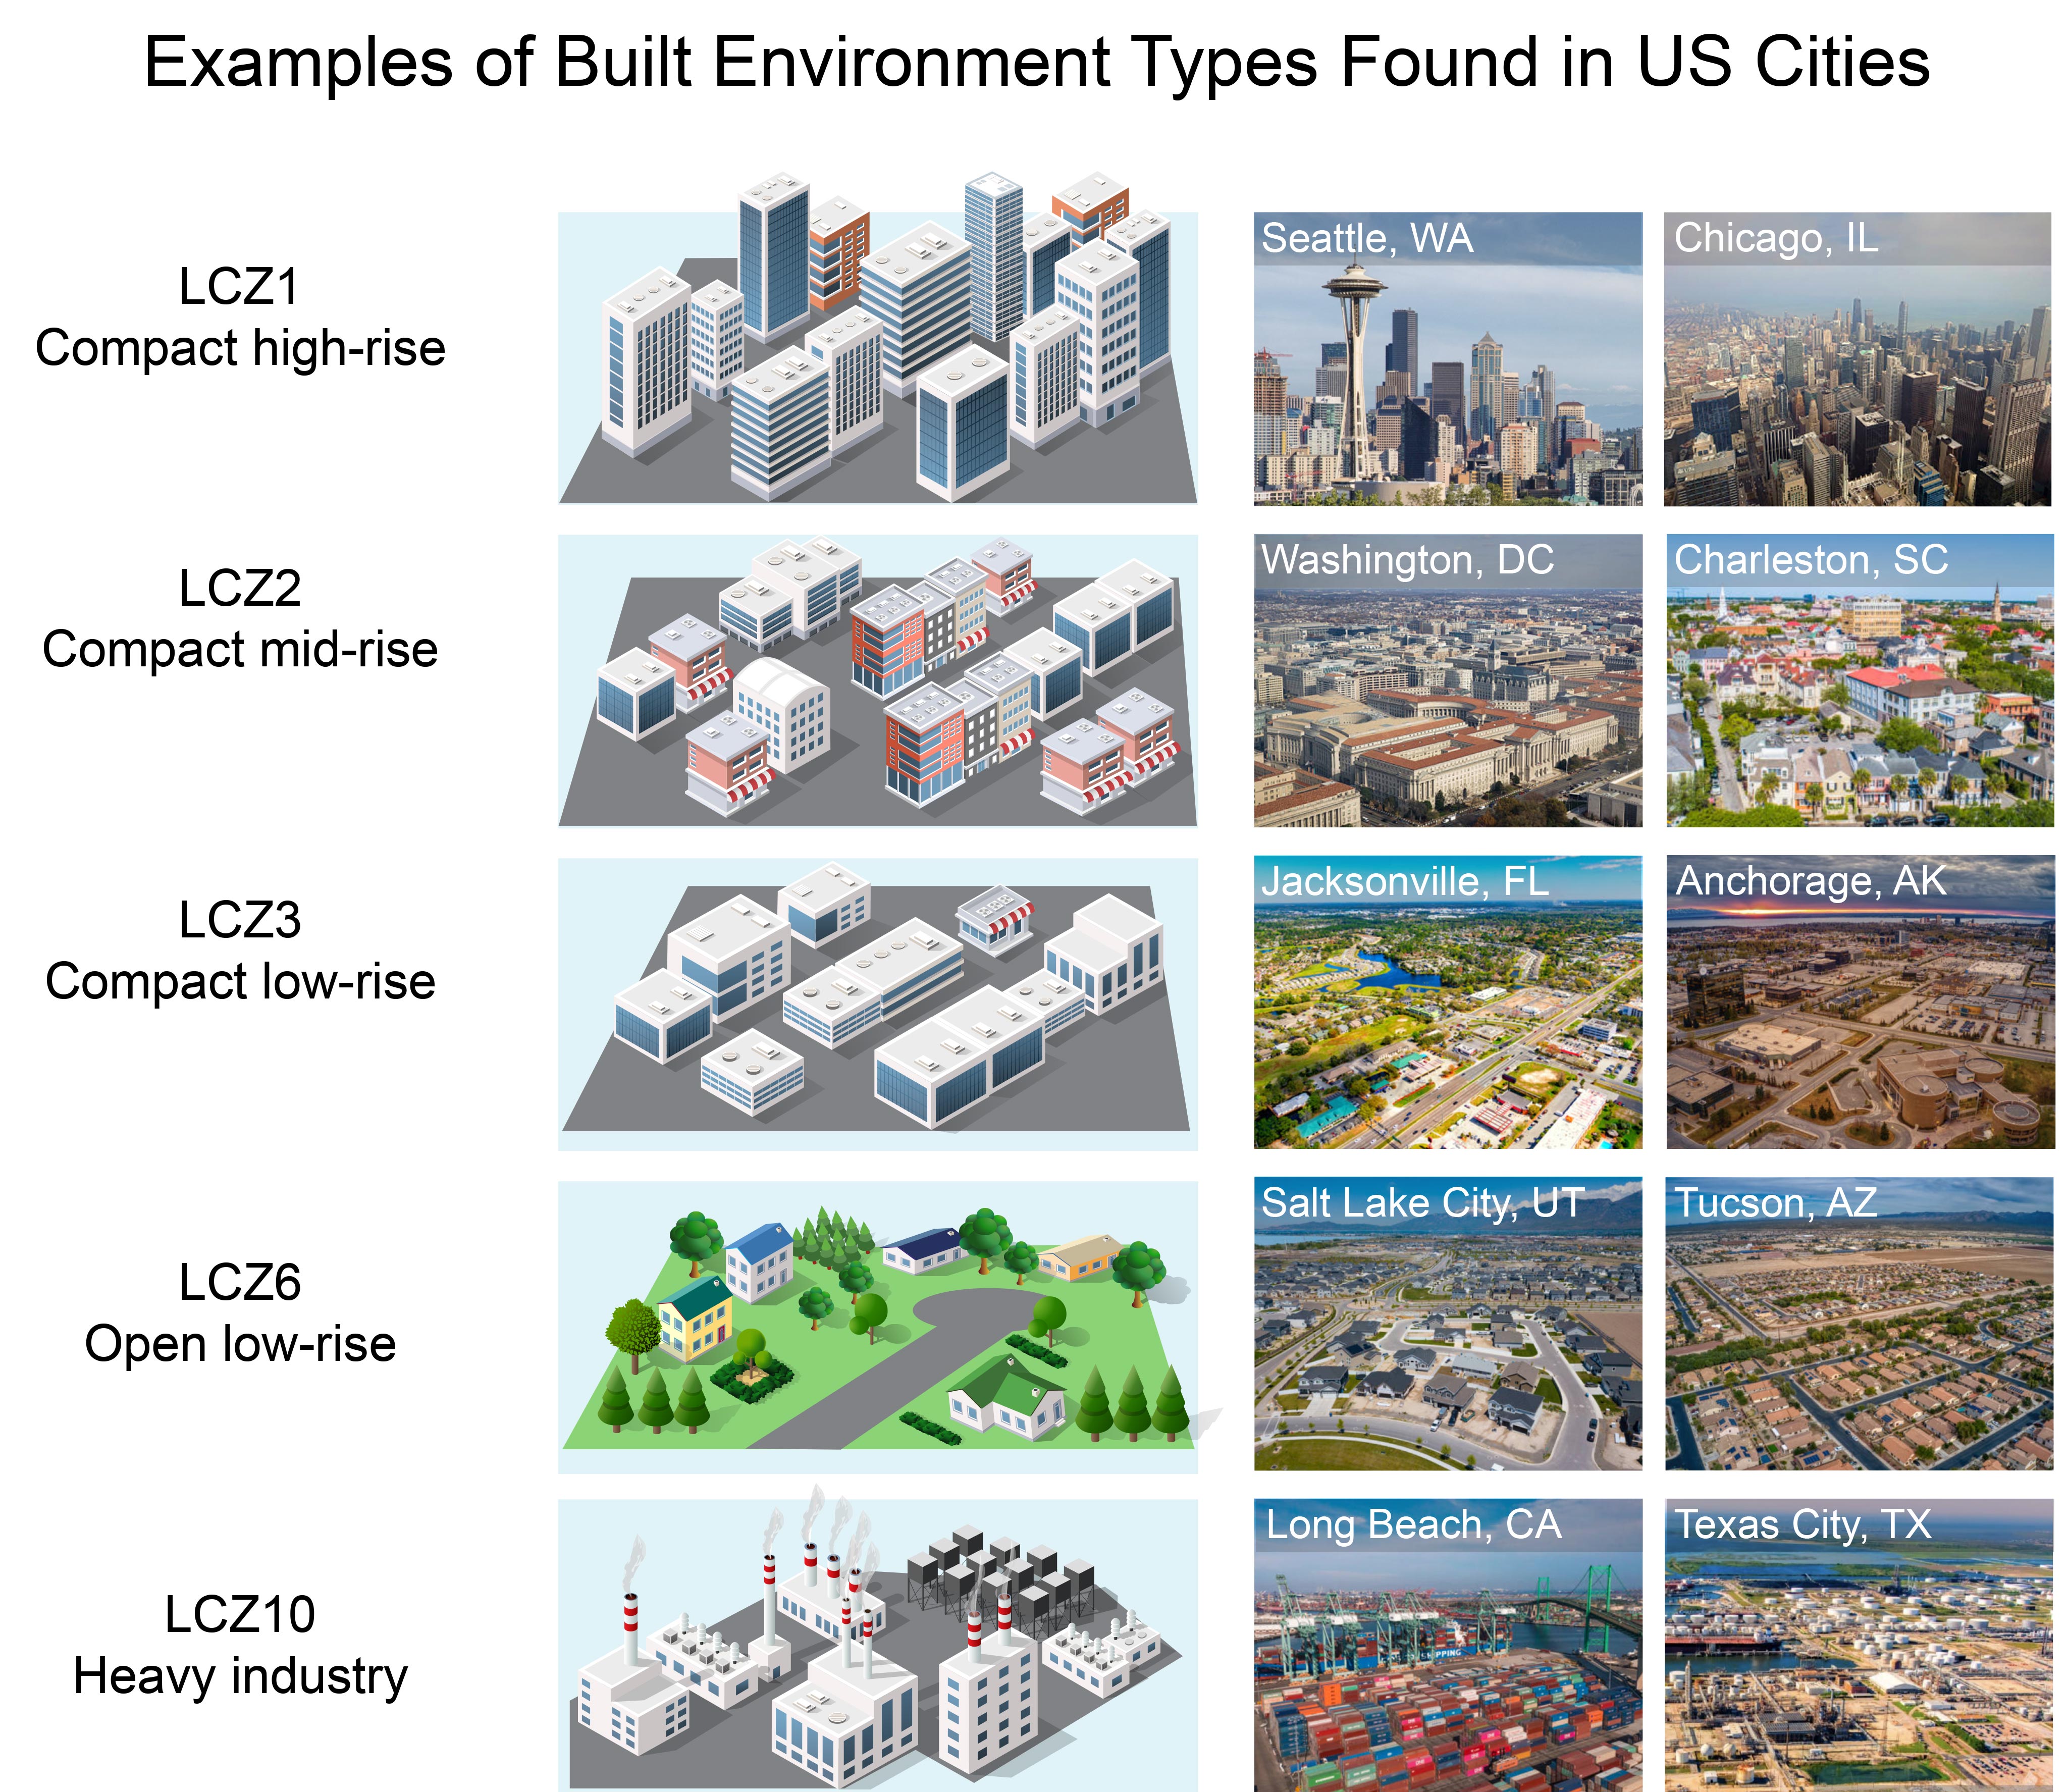 Examples of Built Environment Types Found in US Cities